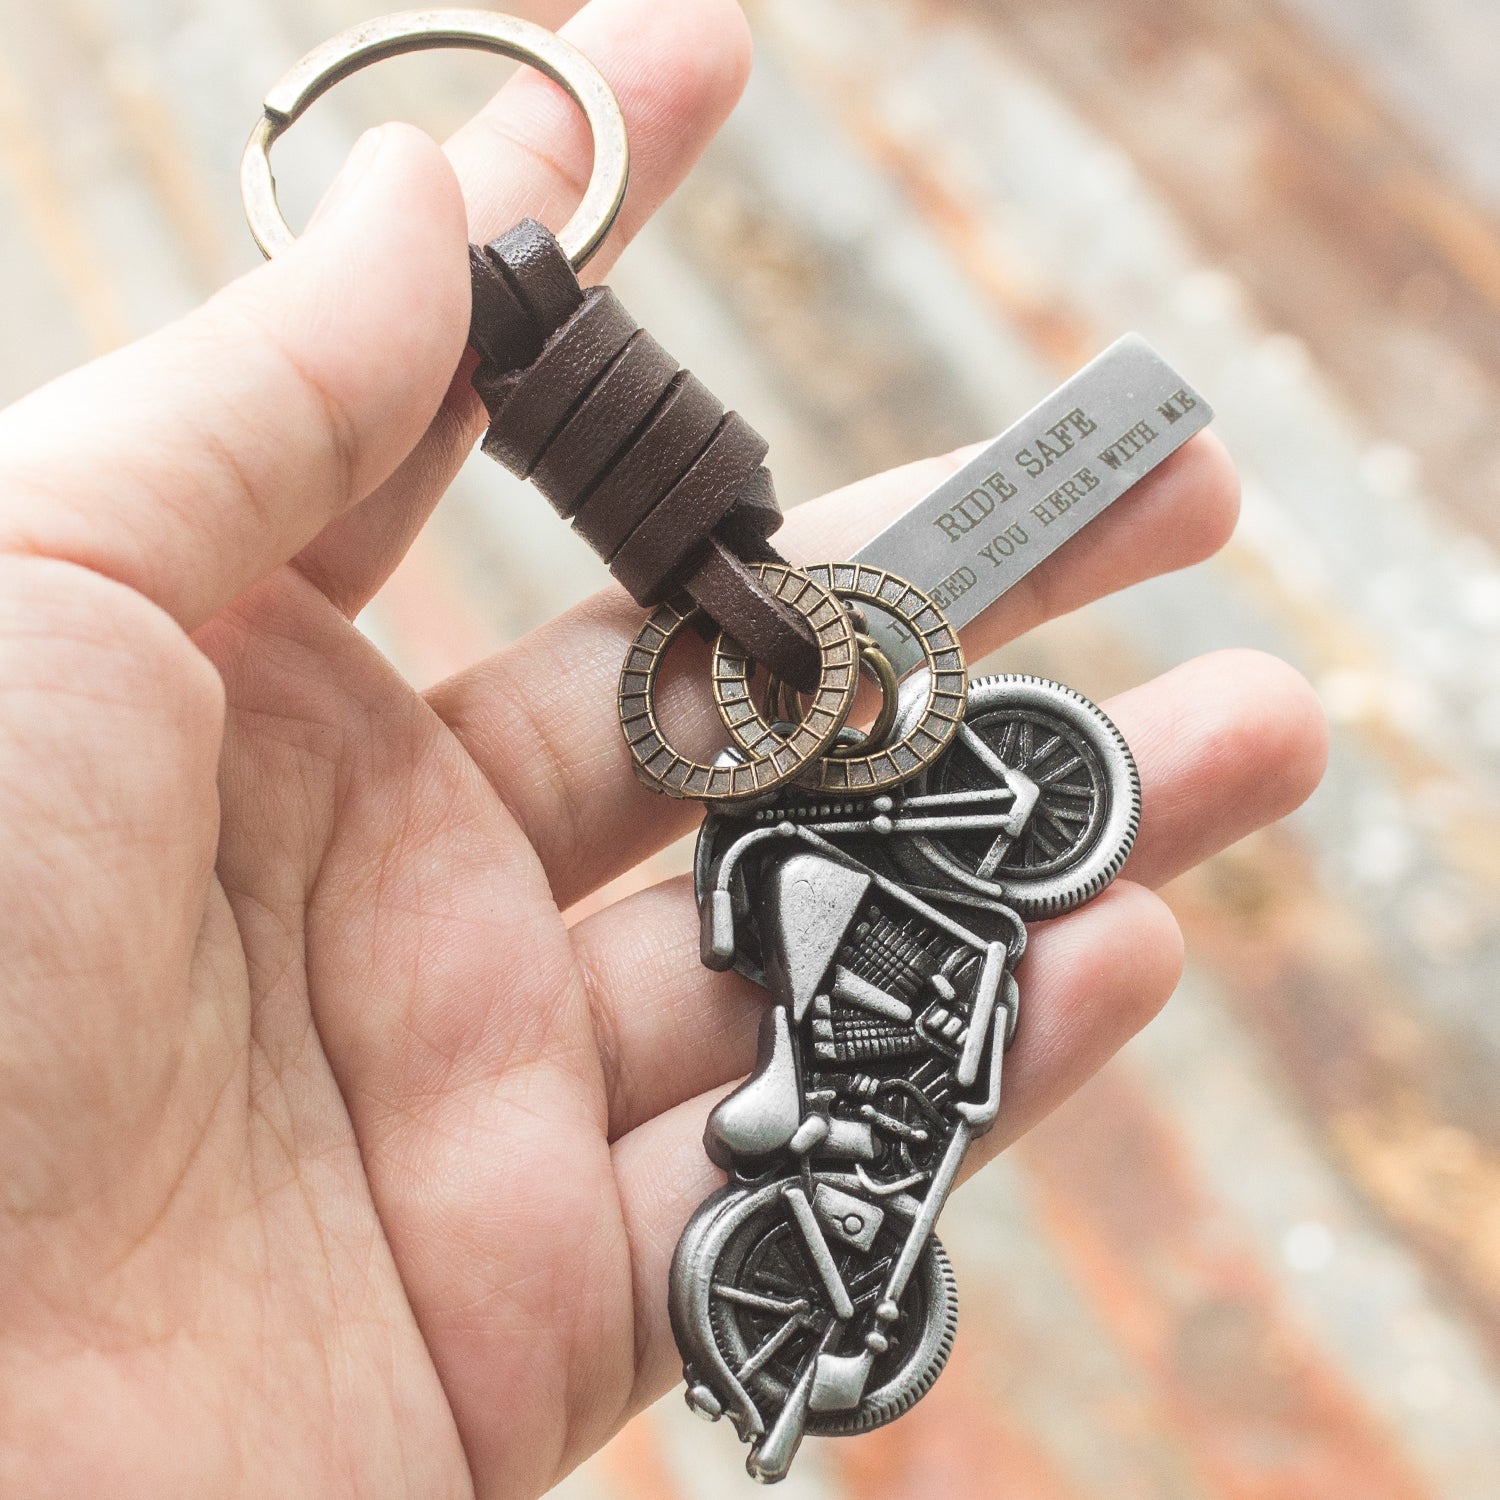 Motorcycle Keychain - Biker - To My Son - Ride Safe, I Need You Here With Me